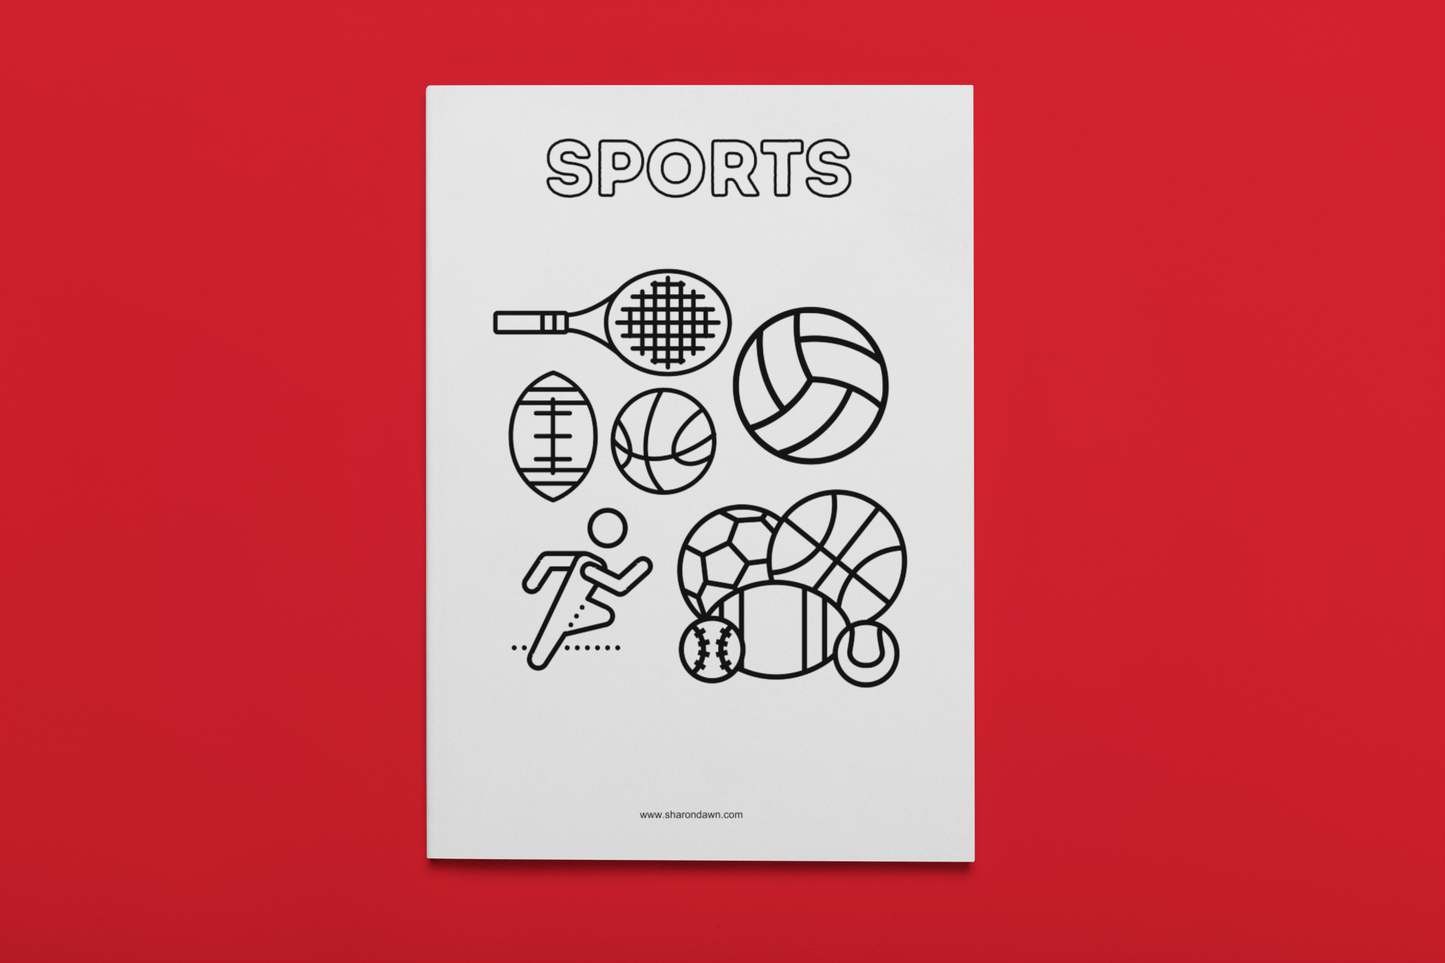 Sports - Colouring Sheet - Printable Digital Download ~ Sharon Dawn Collection